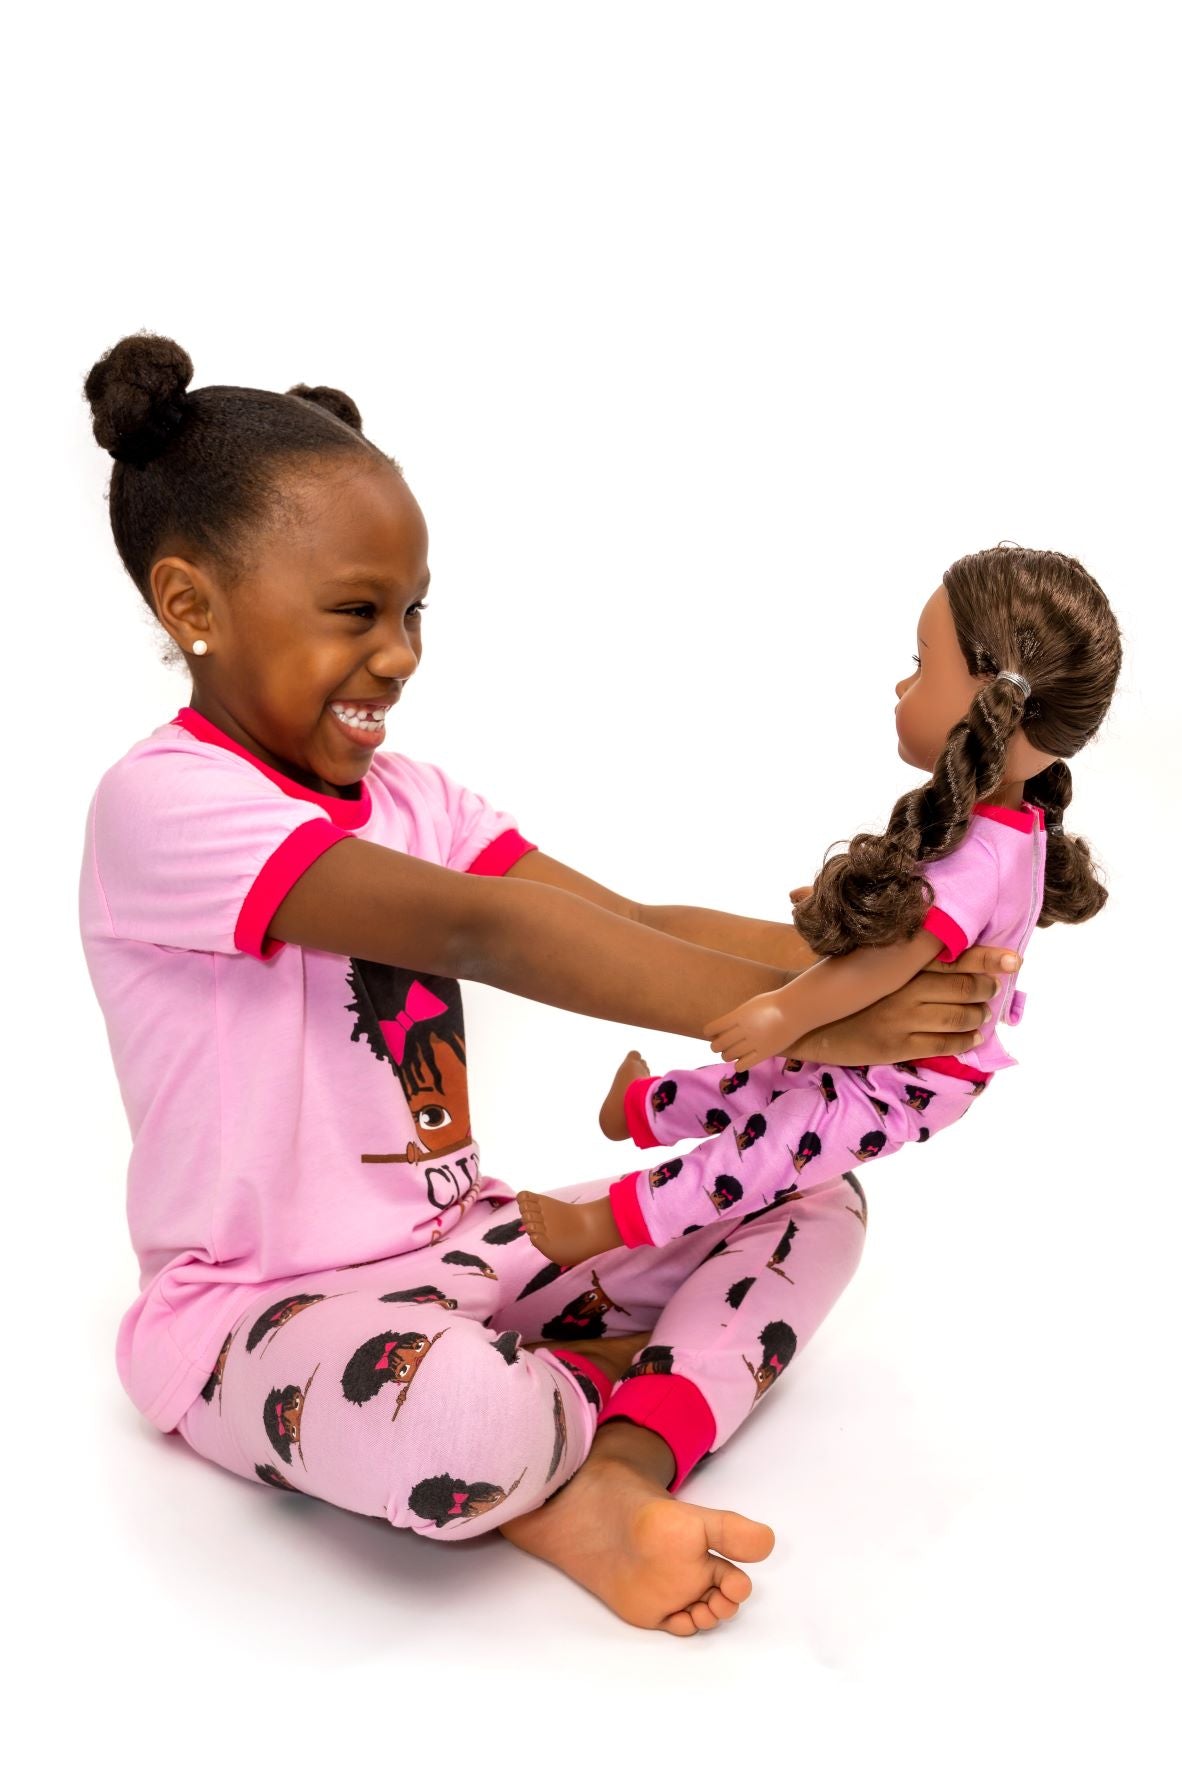 CURLY HEAD CUTIE HAIRSTYLES PAJAMA 2 PC SET SIZE TODDLER 2T - 14 PINK